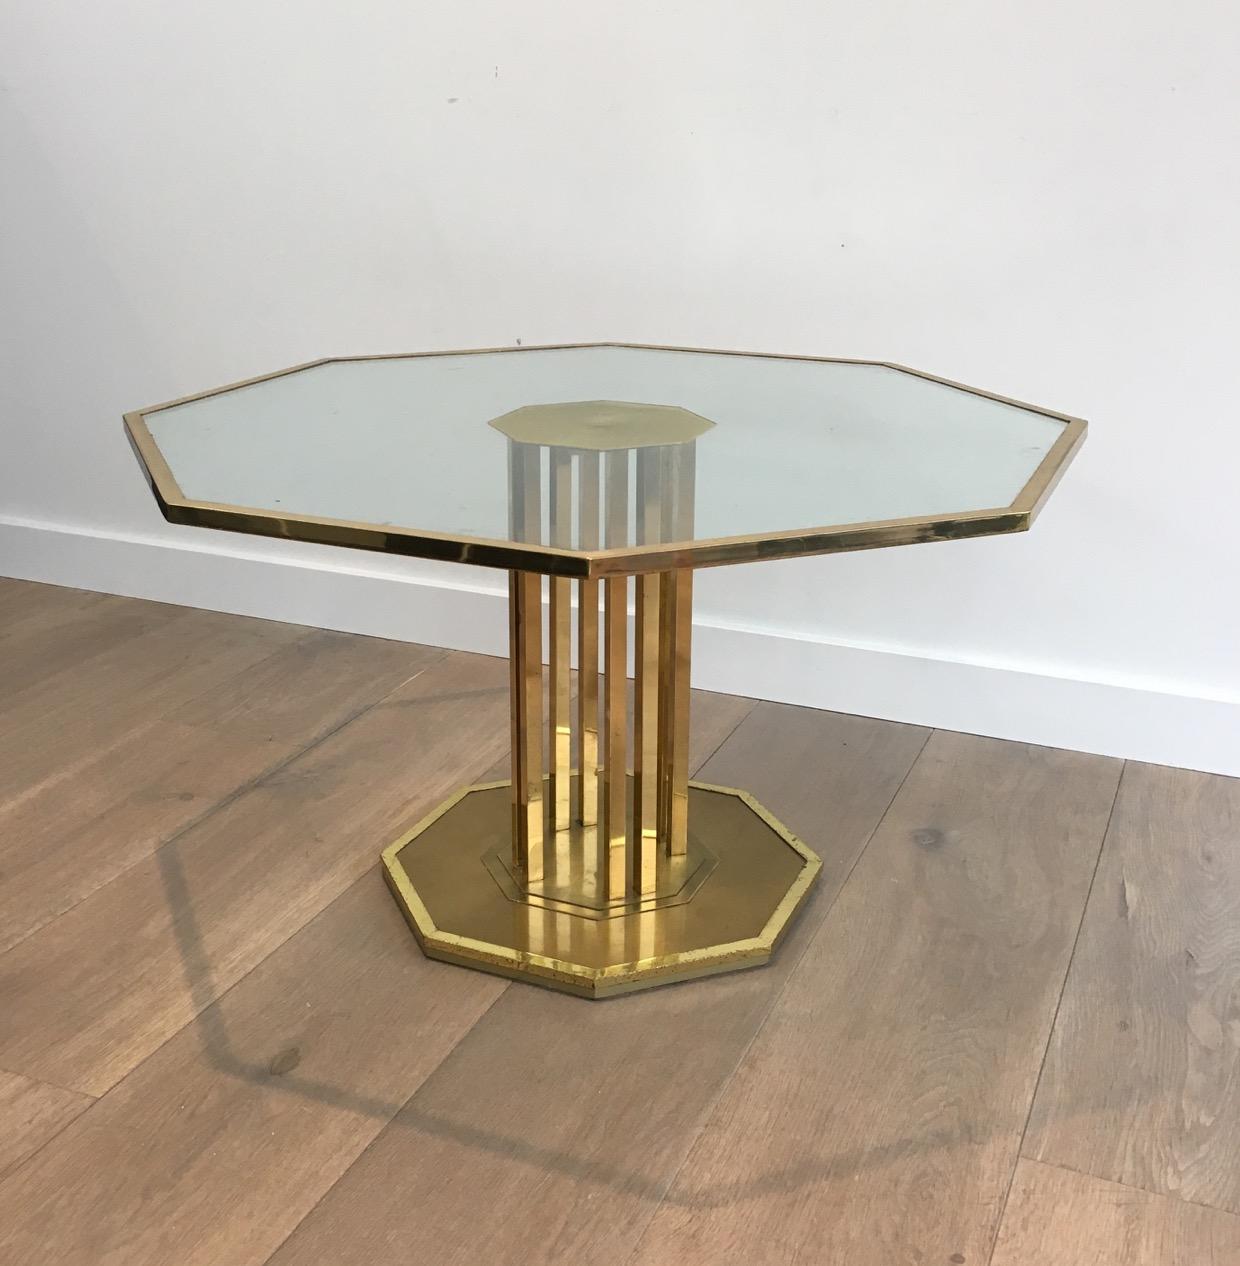 Rare Octagonal Brass and Glass Design Coffee Table, French, circa 1970 For Sale 5